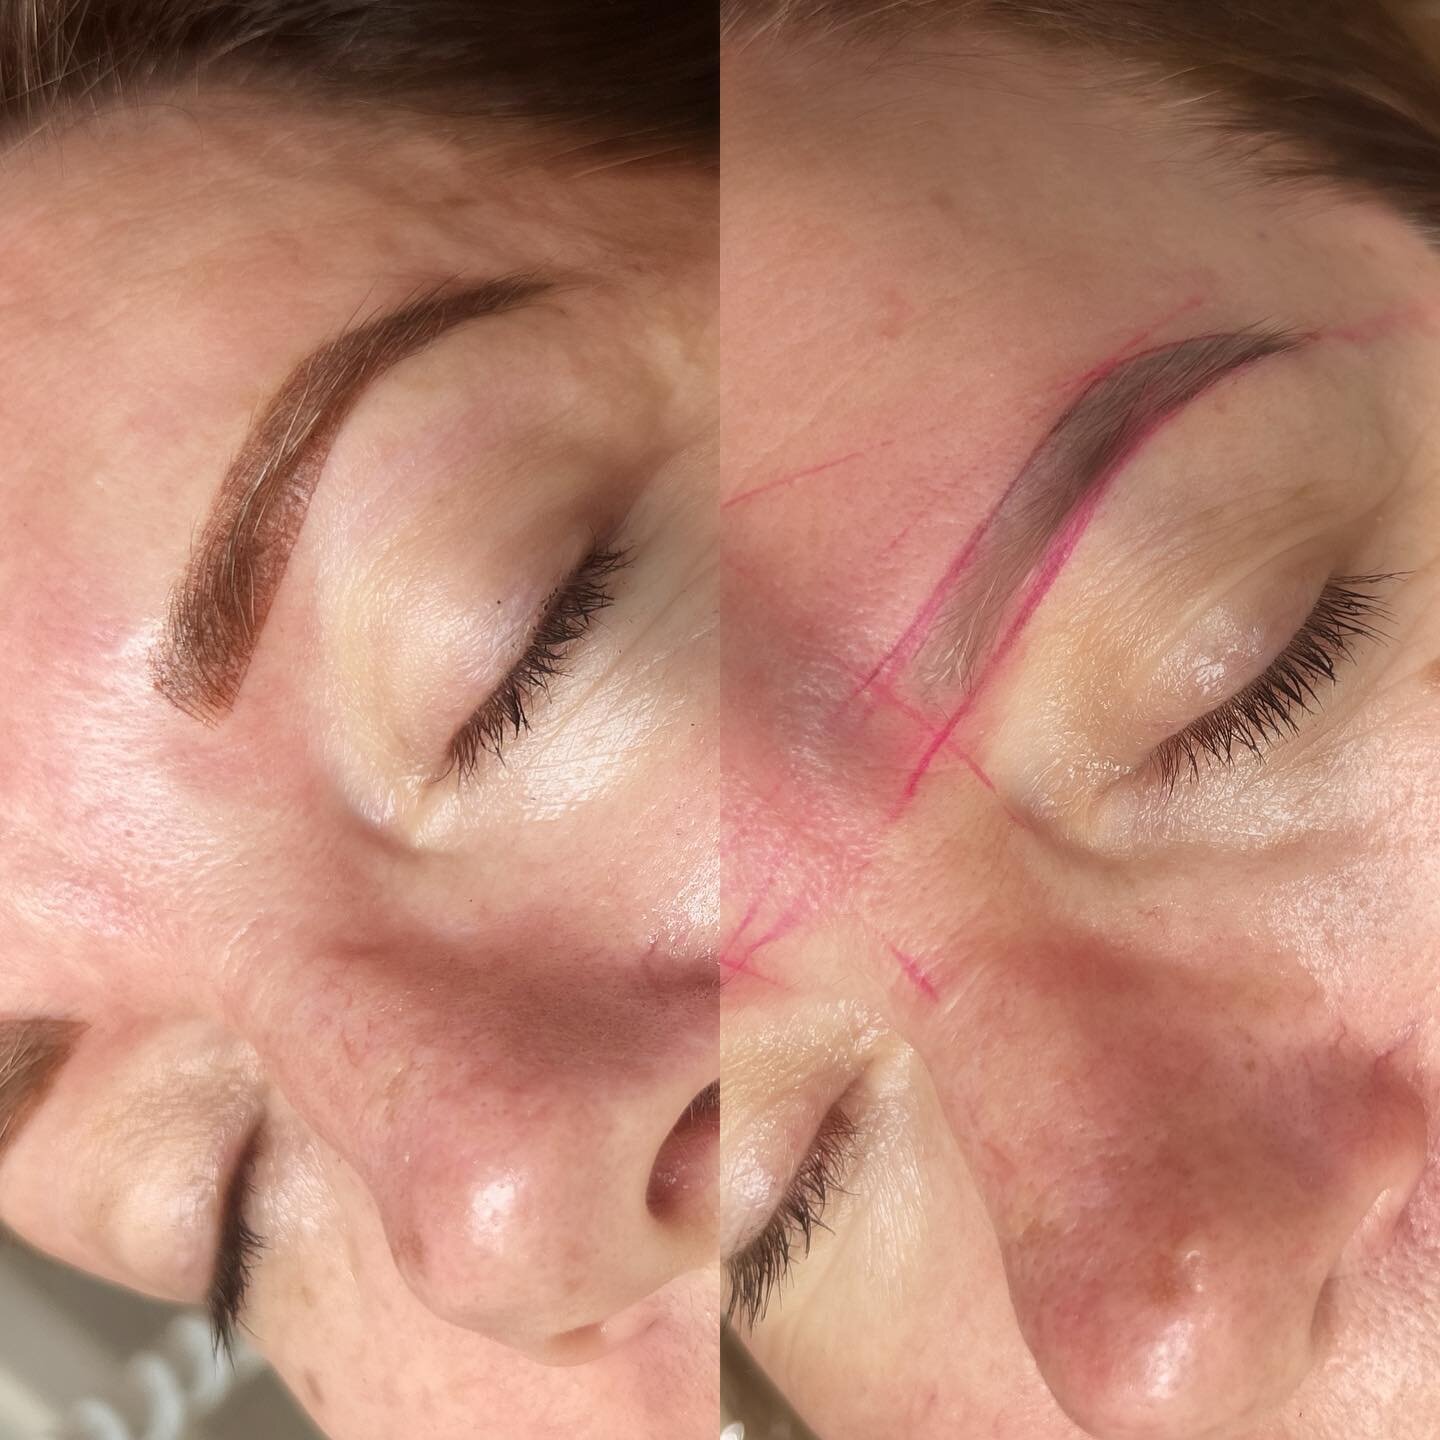 Bringing  life to old grey brows 🤍
Old pigment will sometimes turn grey but never fear we can fix this and correct colour by bringing some warmth back into them &hellip;